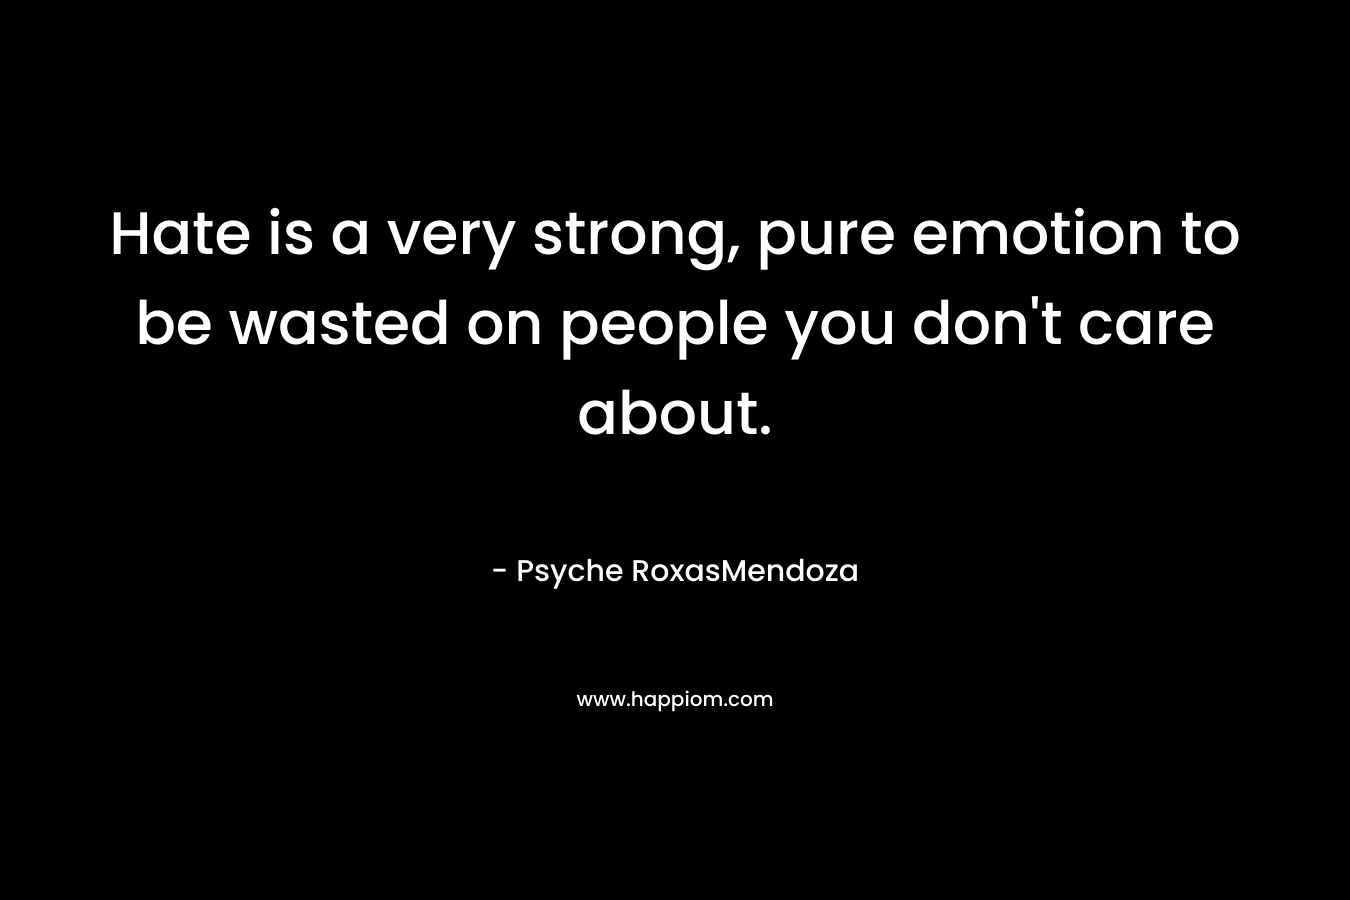 Hate is a very strong, pure emotion to be wasted on people you don't care about.